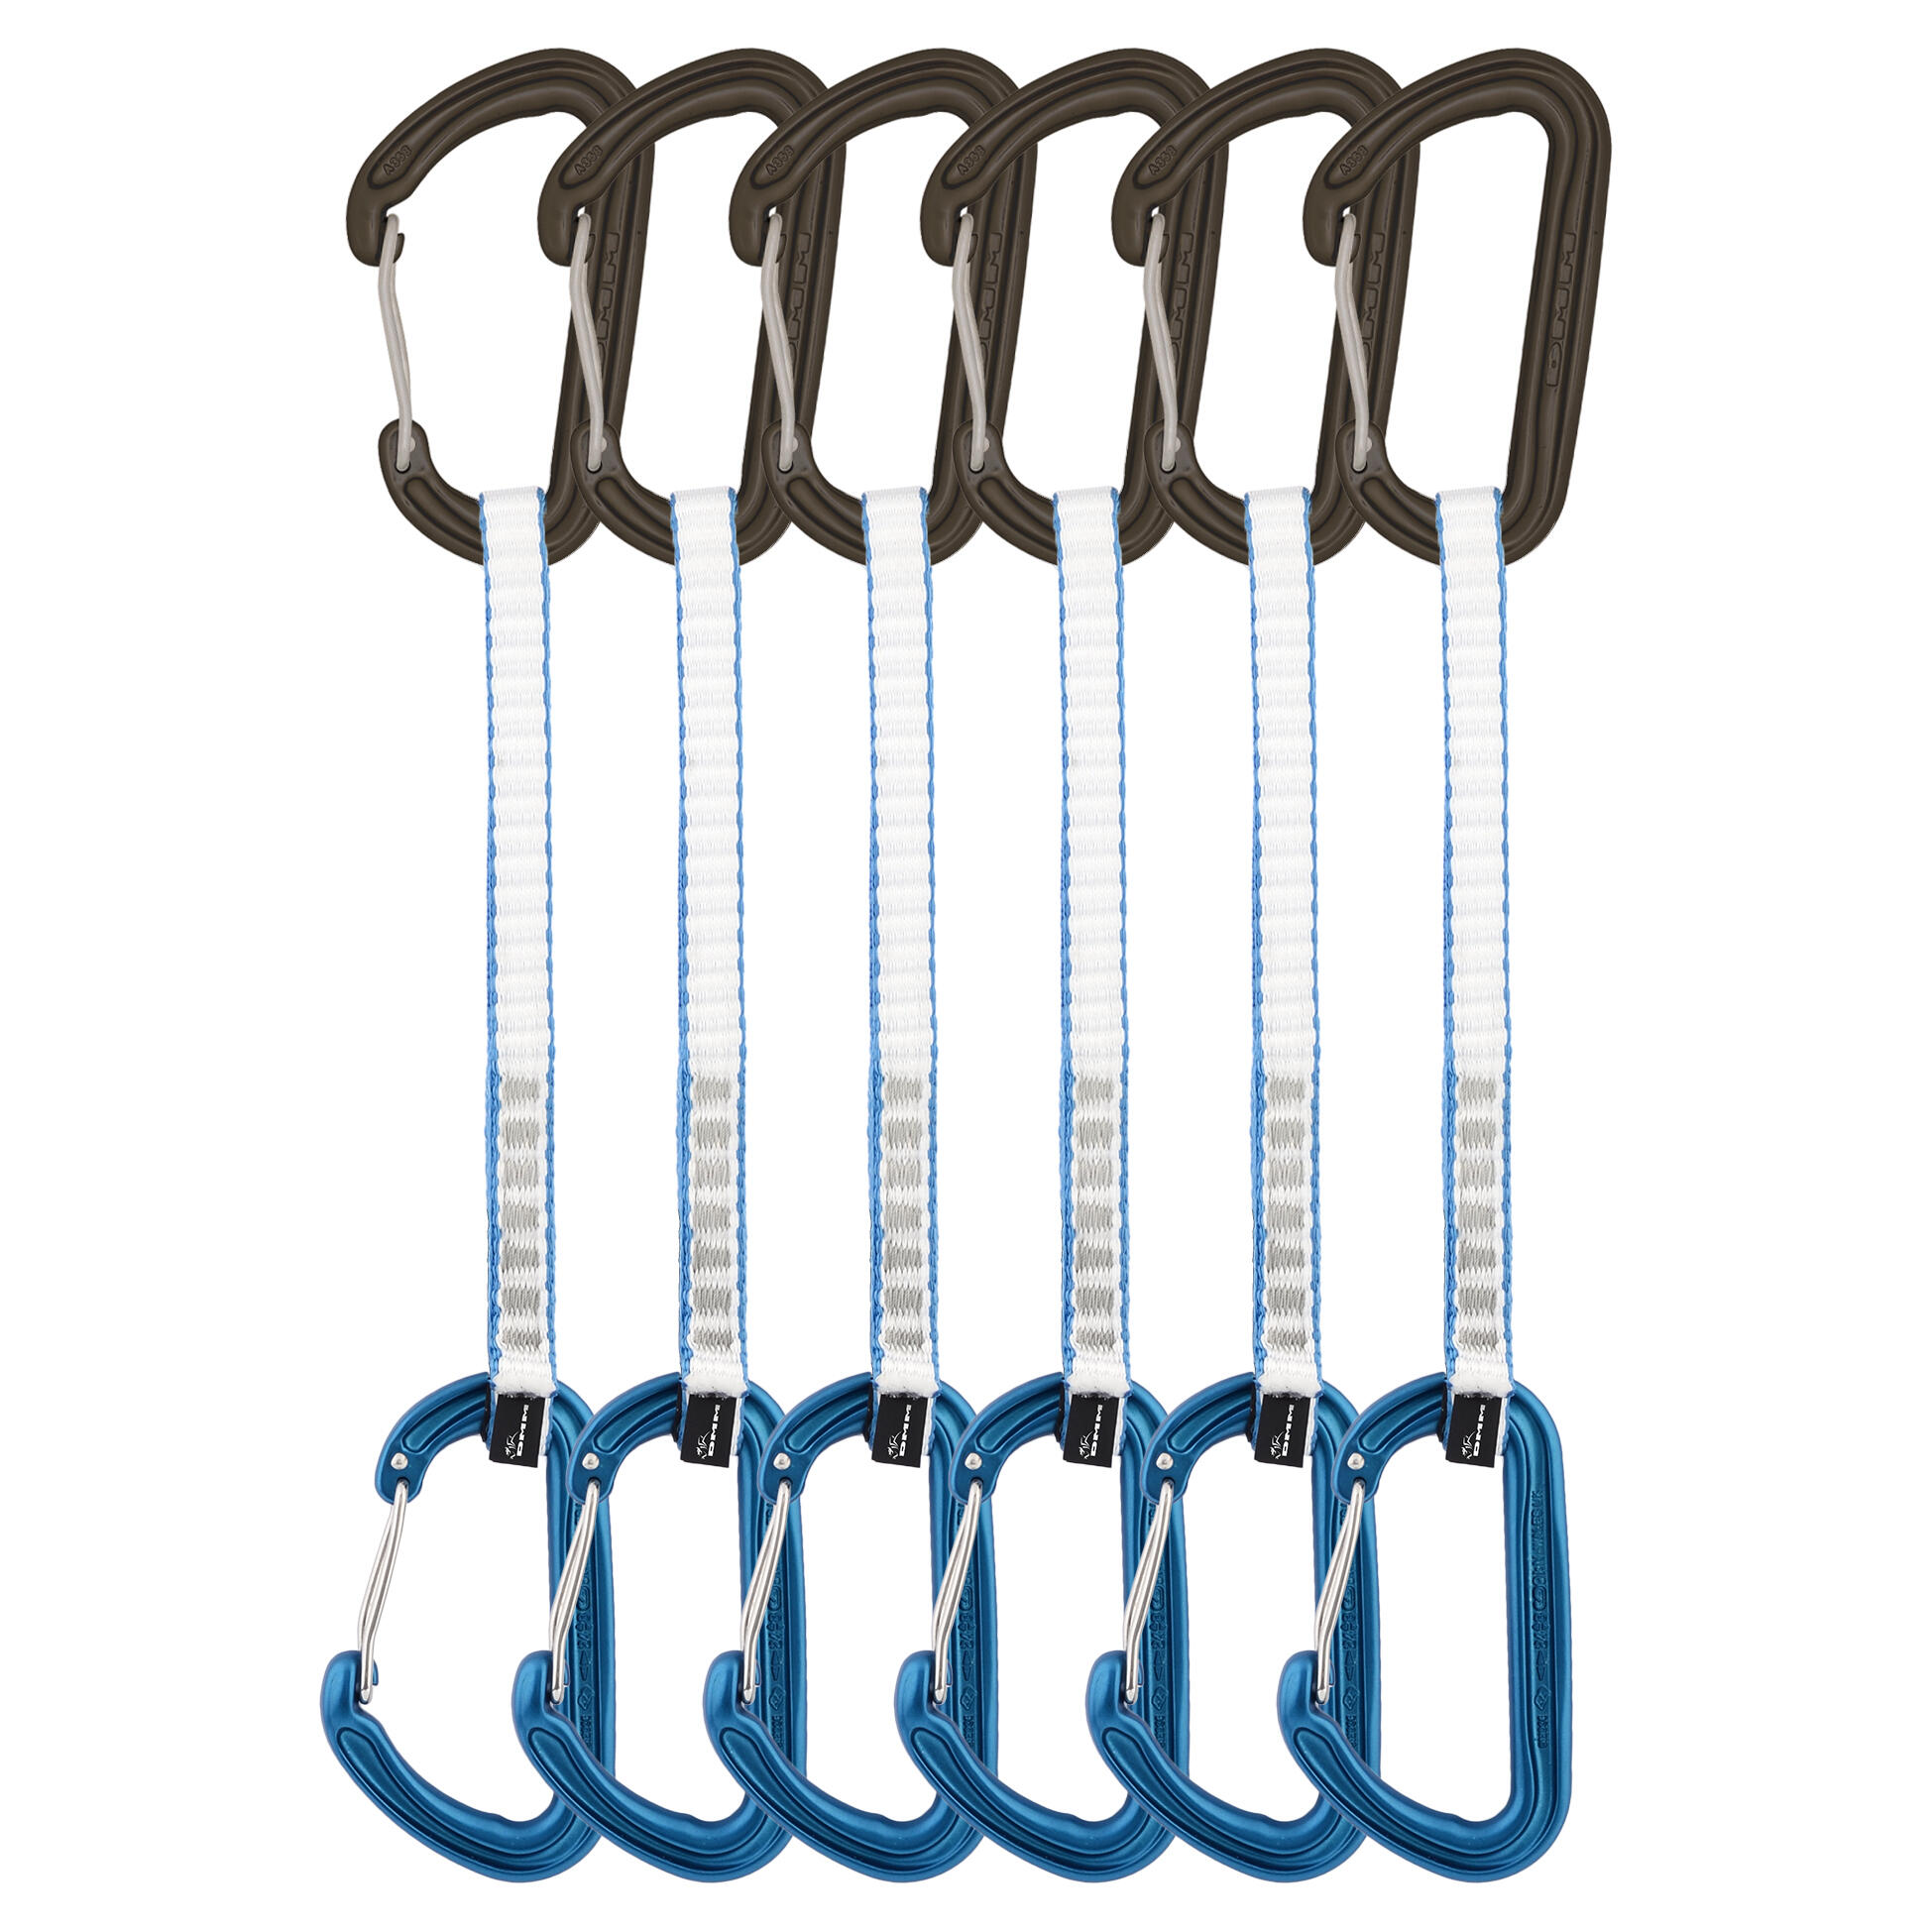 DMM Spectre Quickdraw 18cm - Blue - 6 Pack